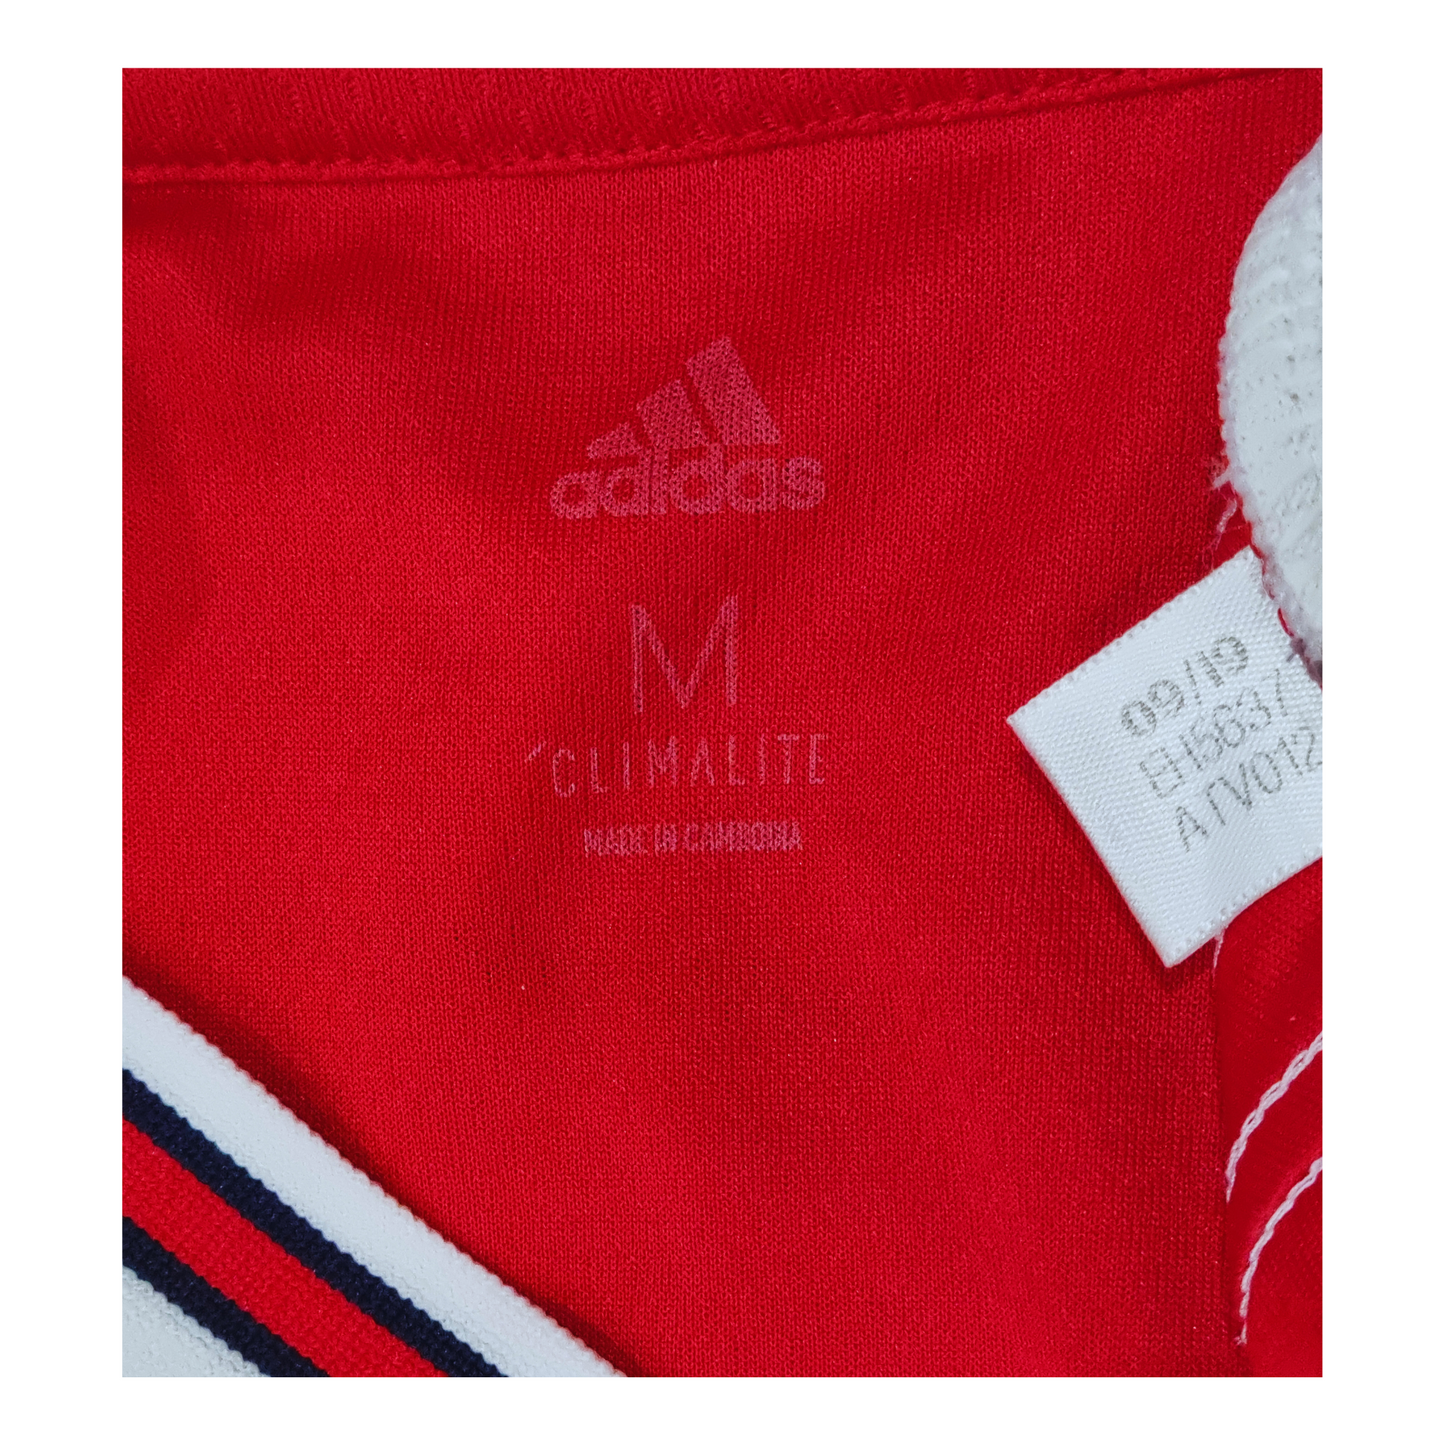 A pair of red Adidas shorts with an Arsenal 2019/20 Home Jersey label on them.